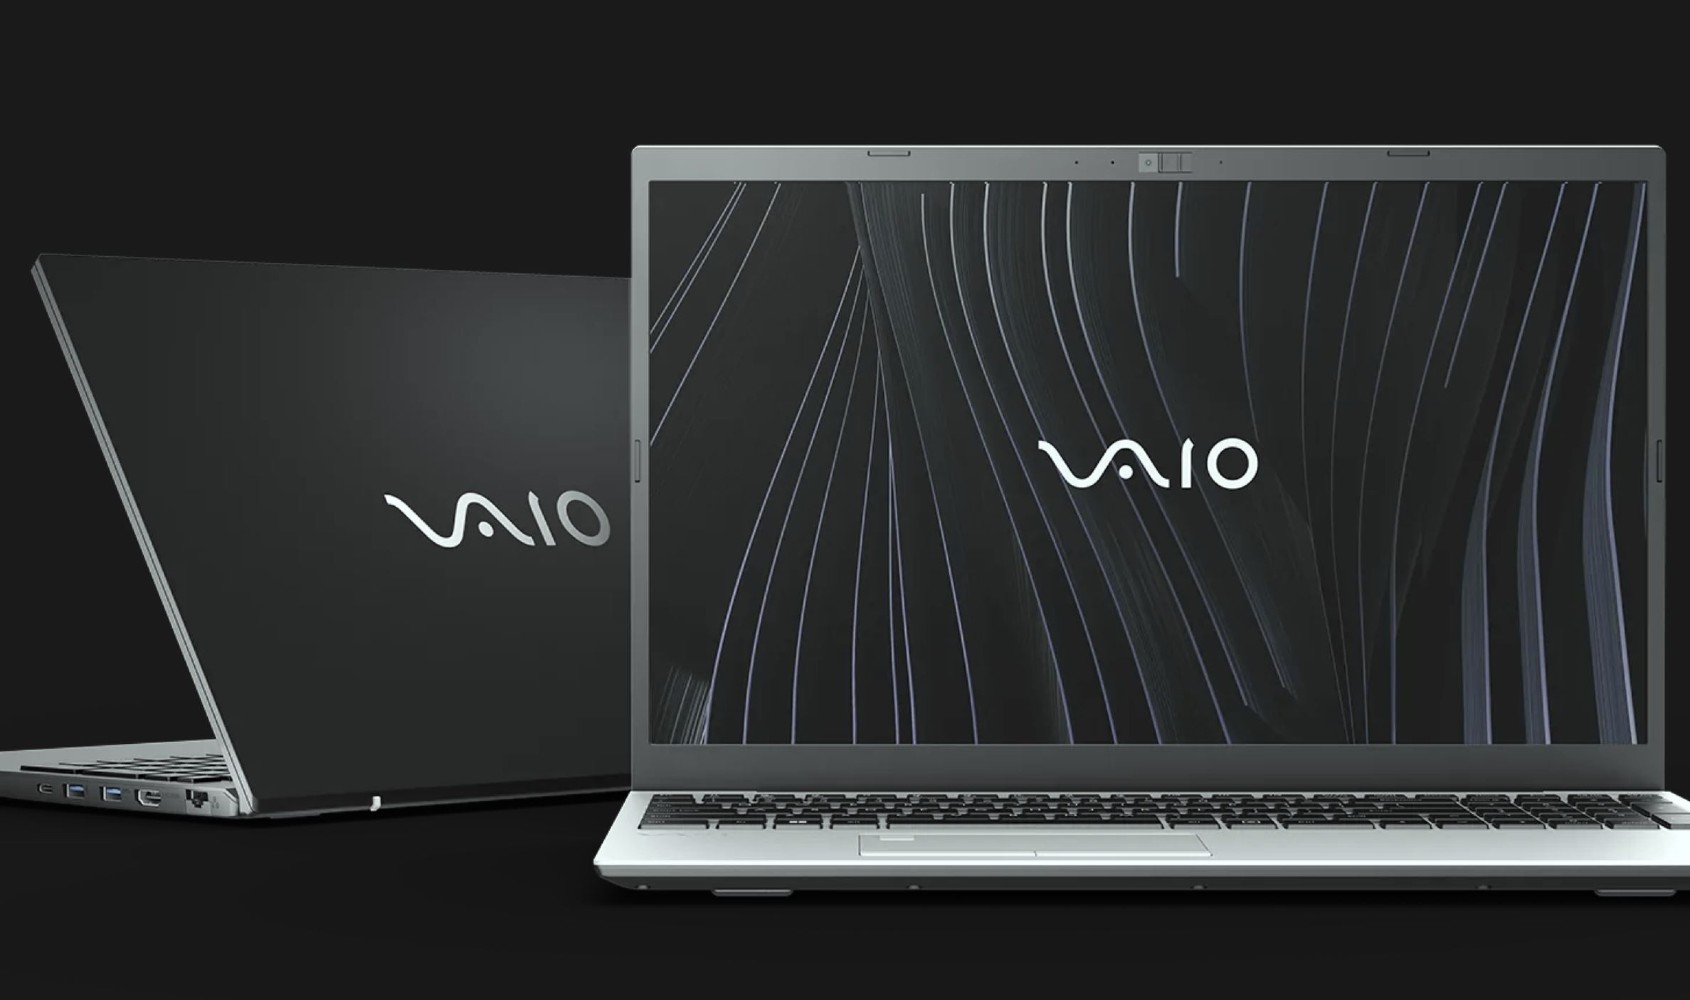 Vaio laptops are back and they are surprisingly affordable